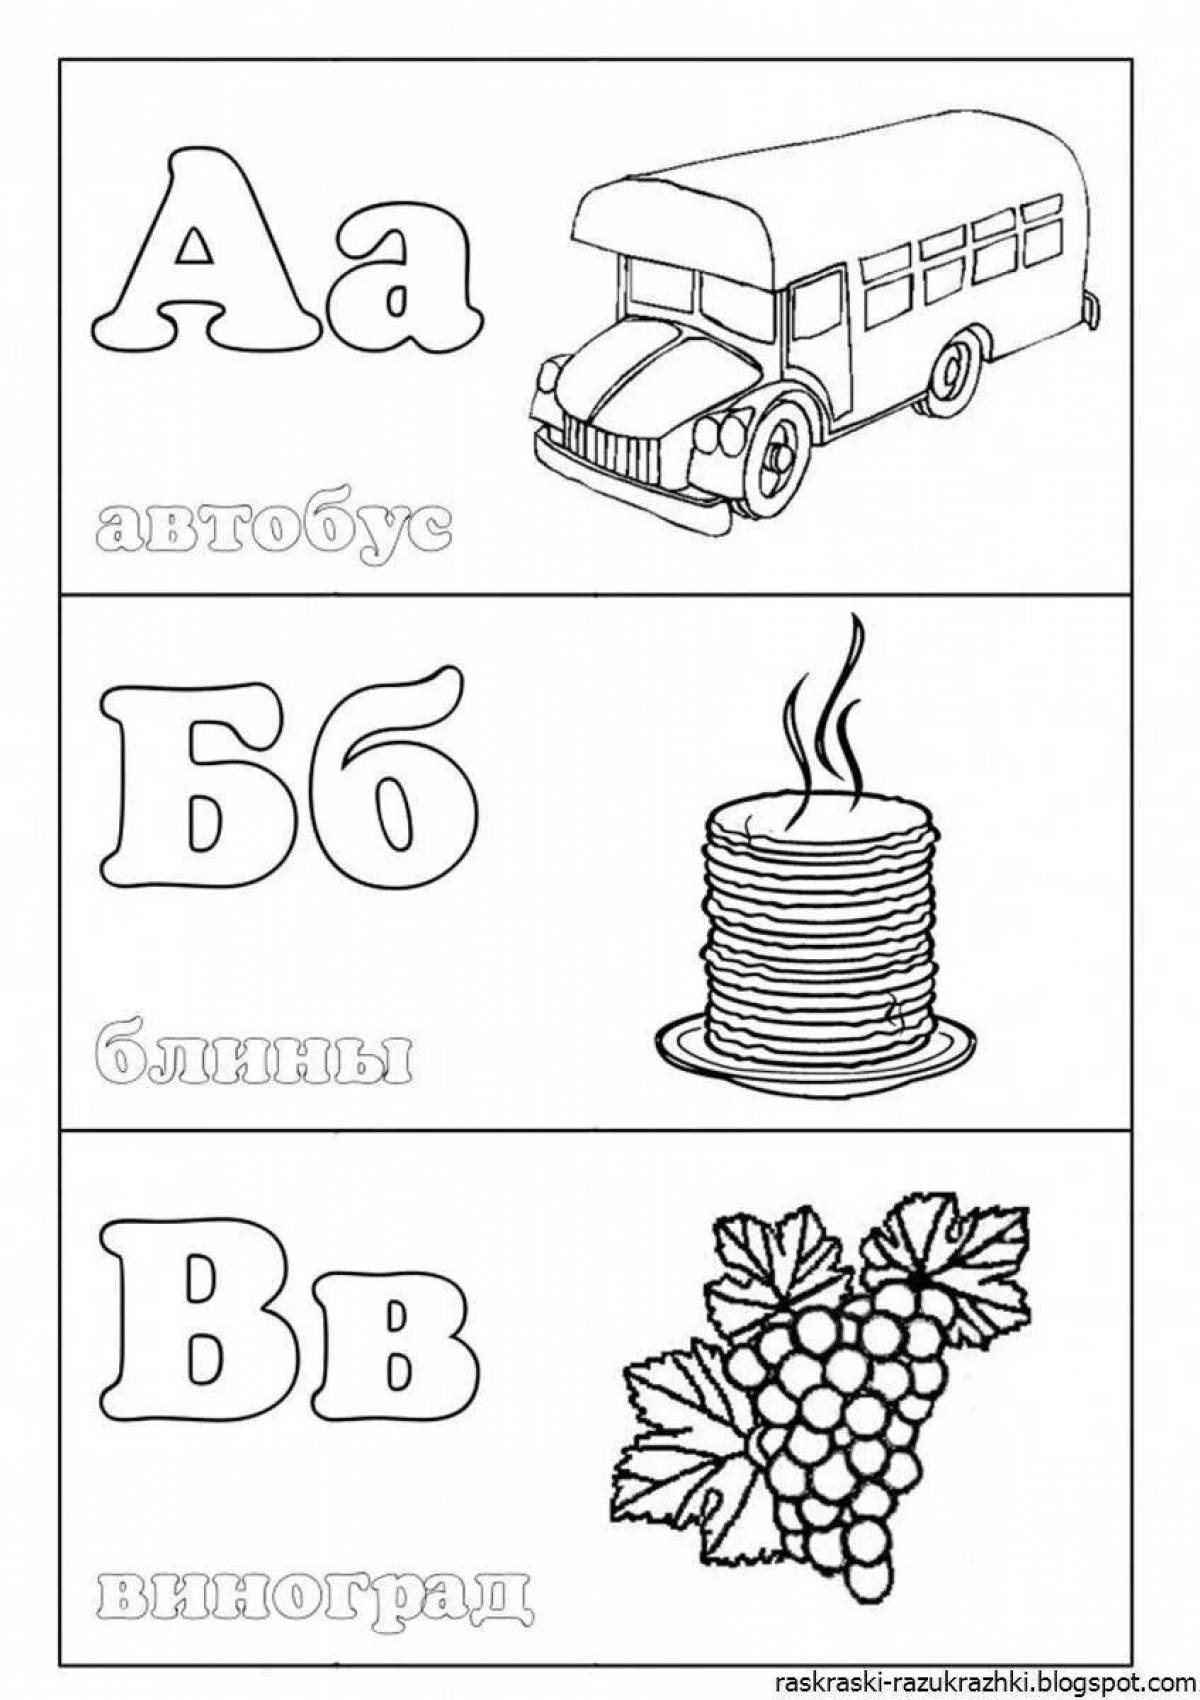 Bright coloring of the Russian alphabet for children